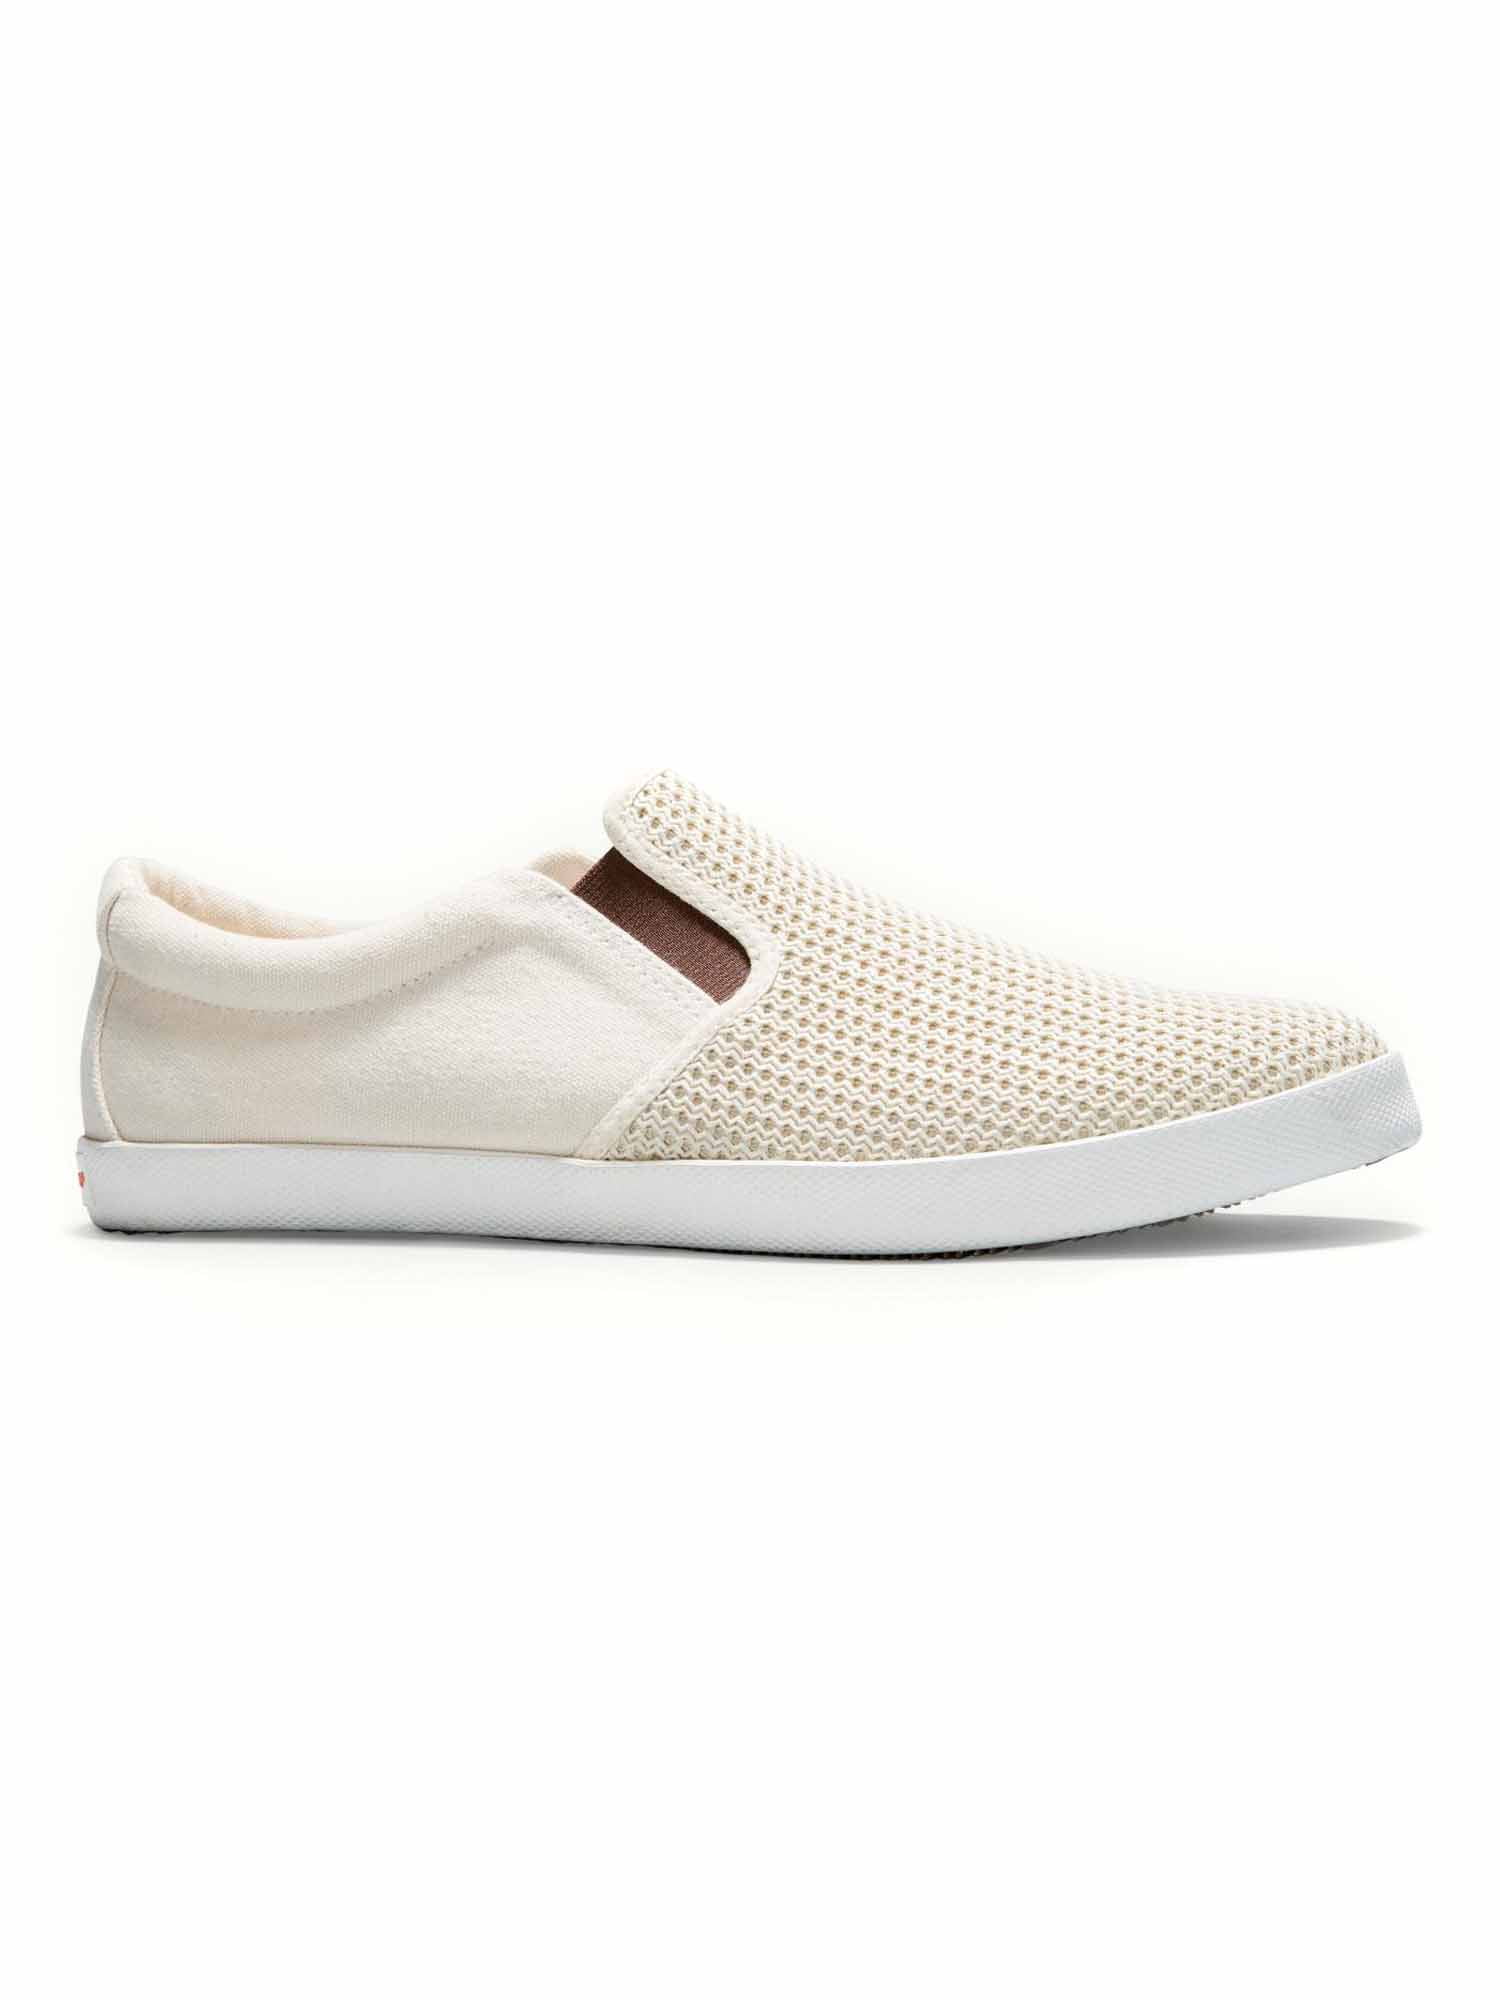 tommy bahama mens slip on shoes